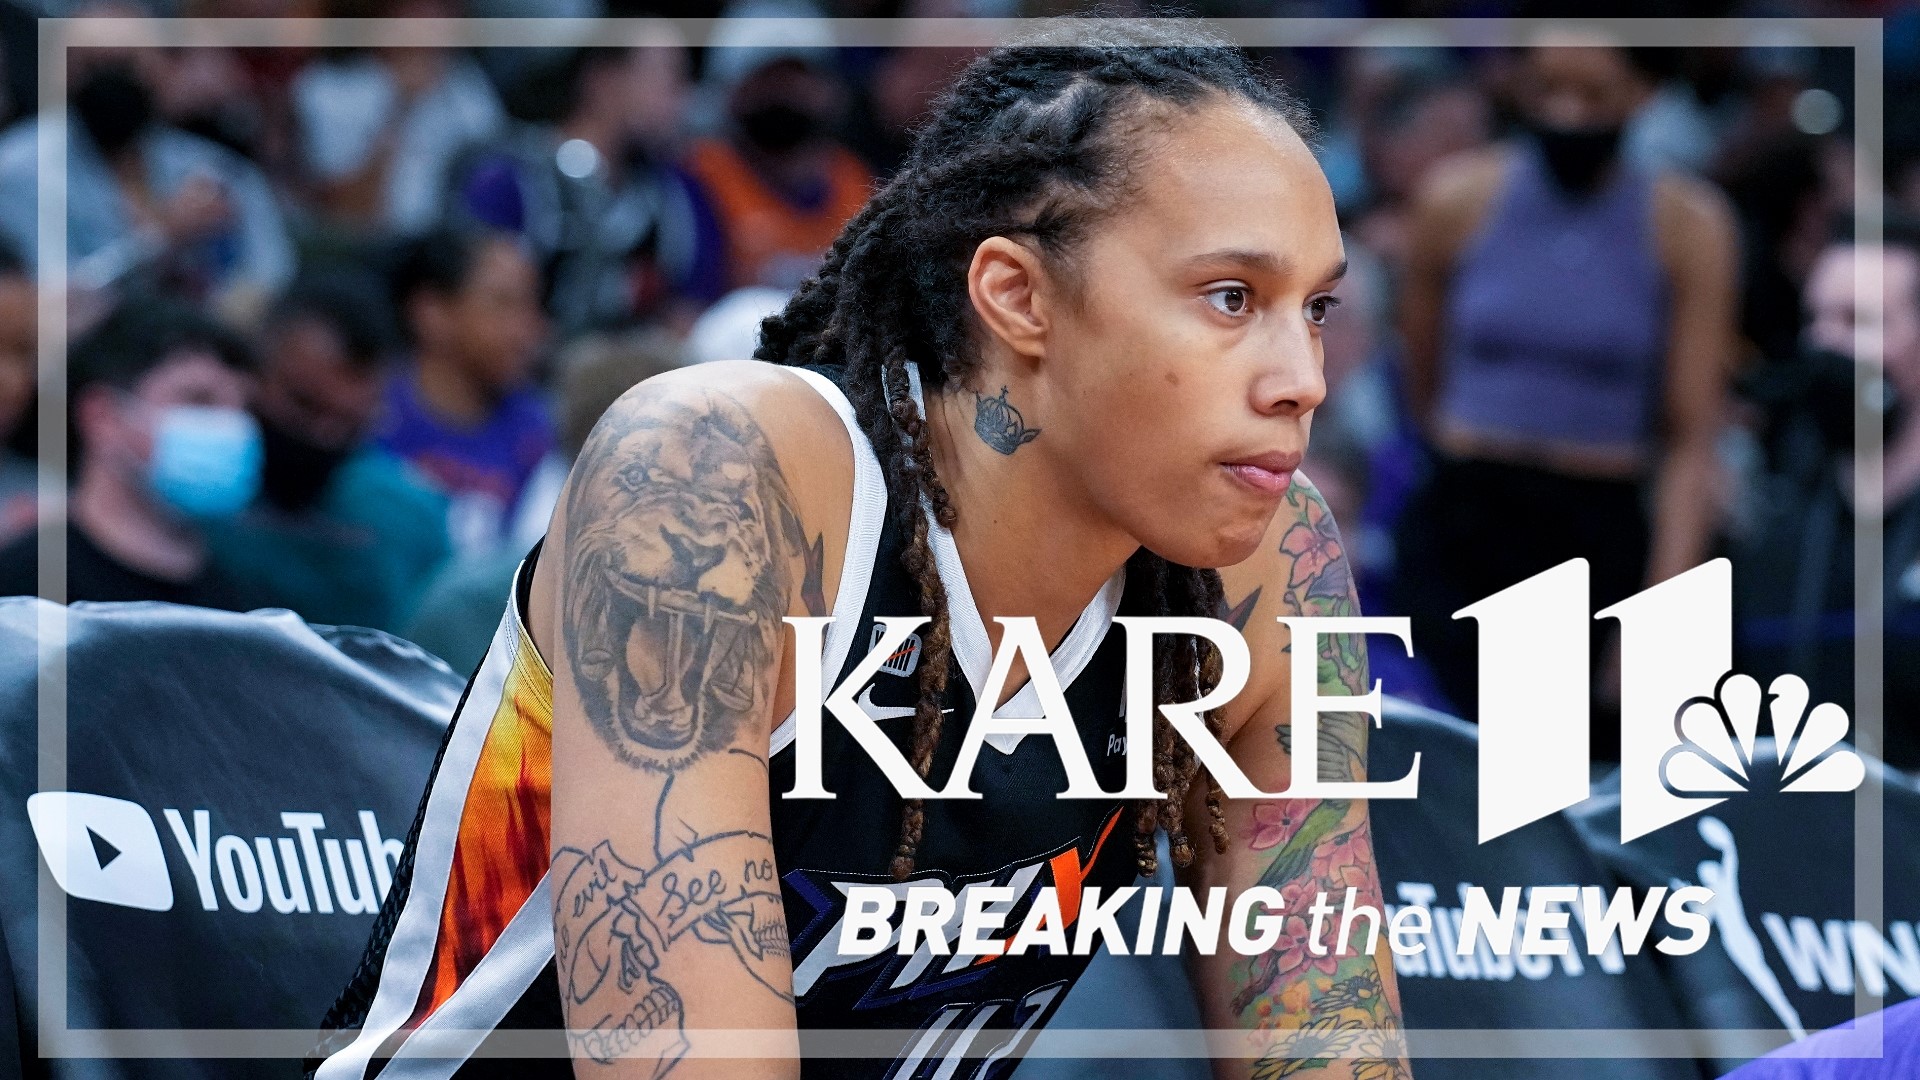 Brittney Griner now faces a new future, but one she won't face alone, said Lynx coach Cheryl Reeve said.